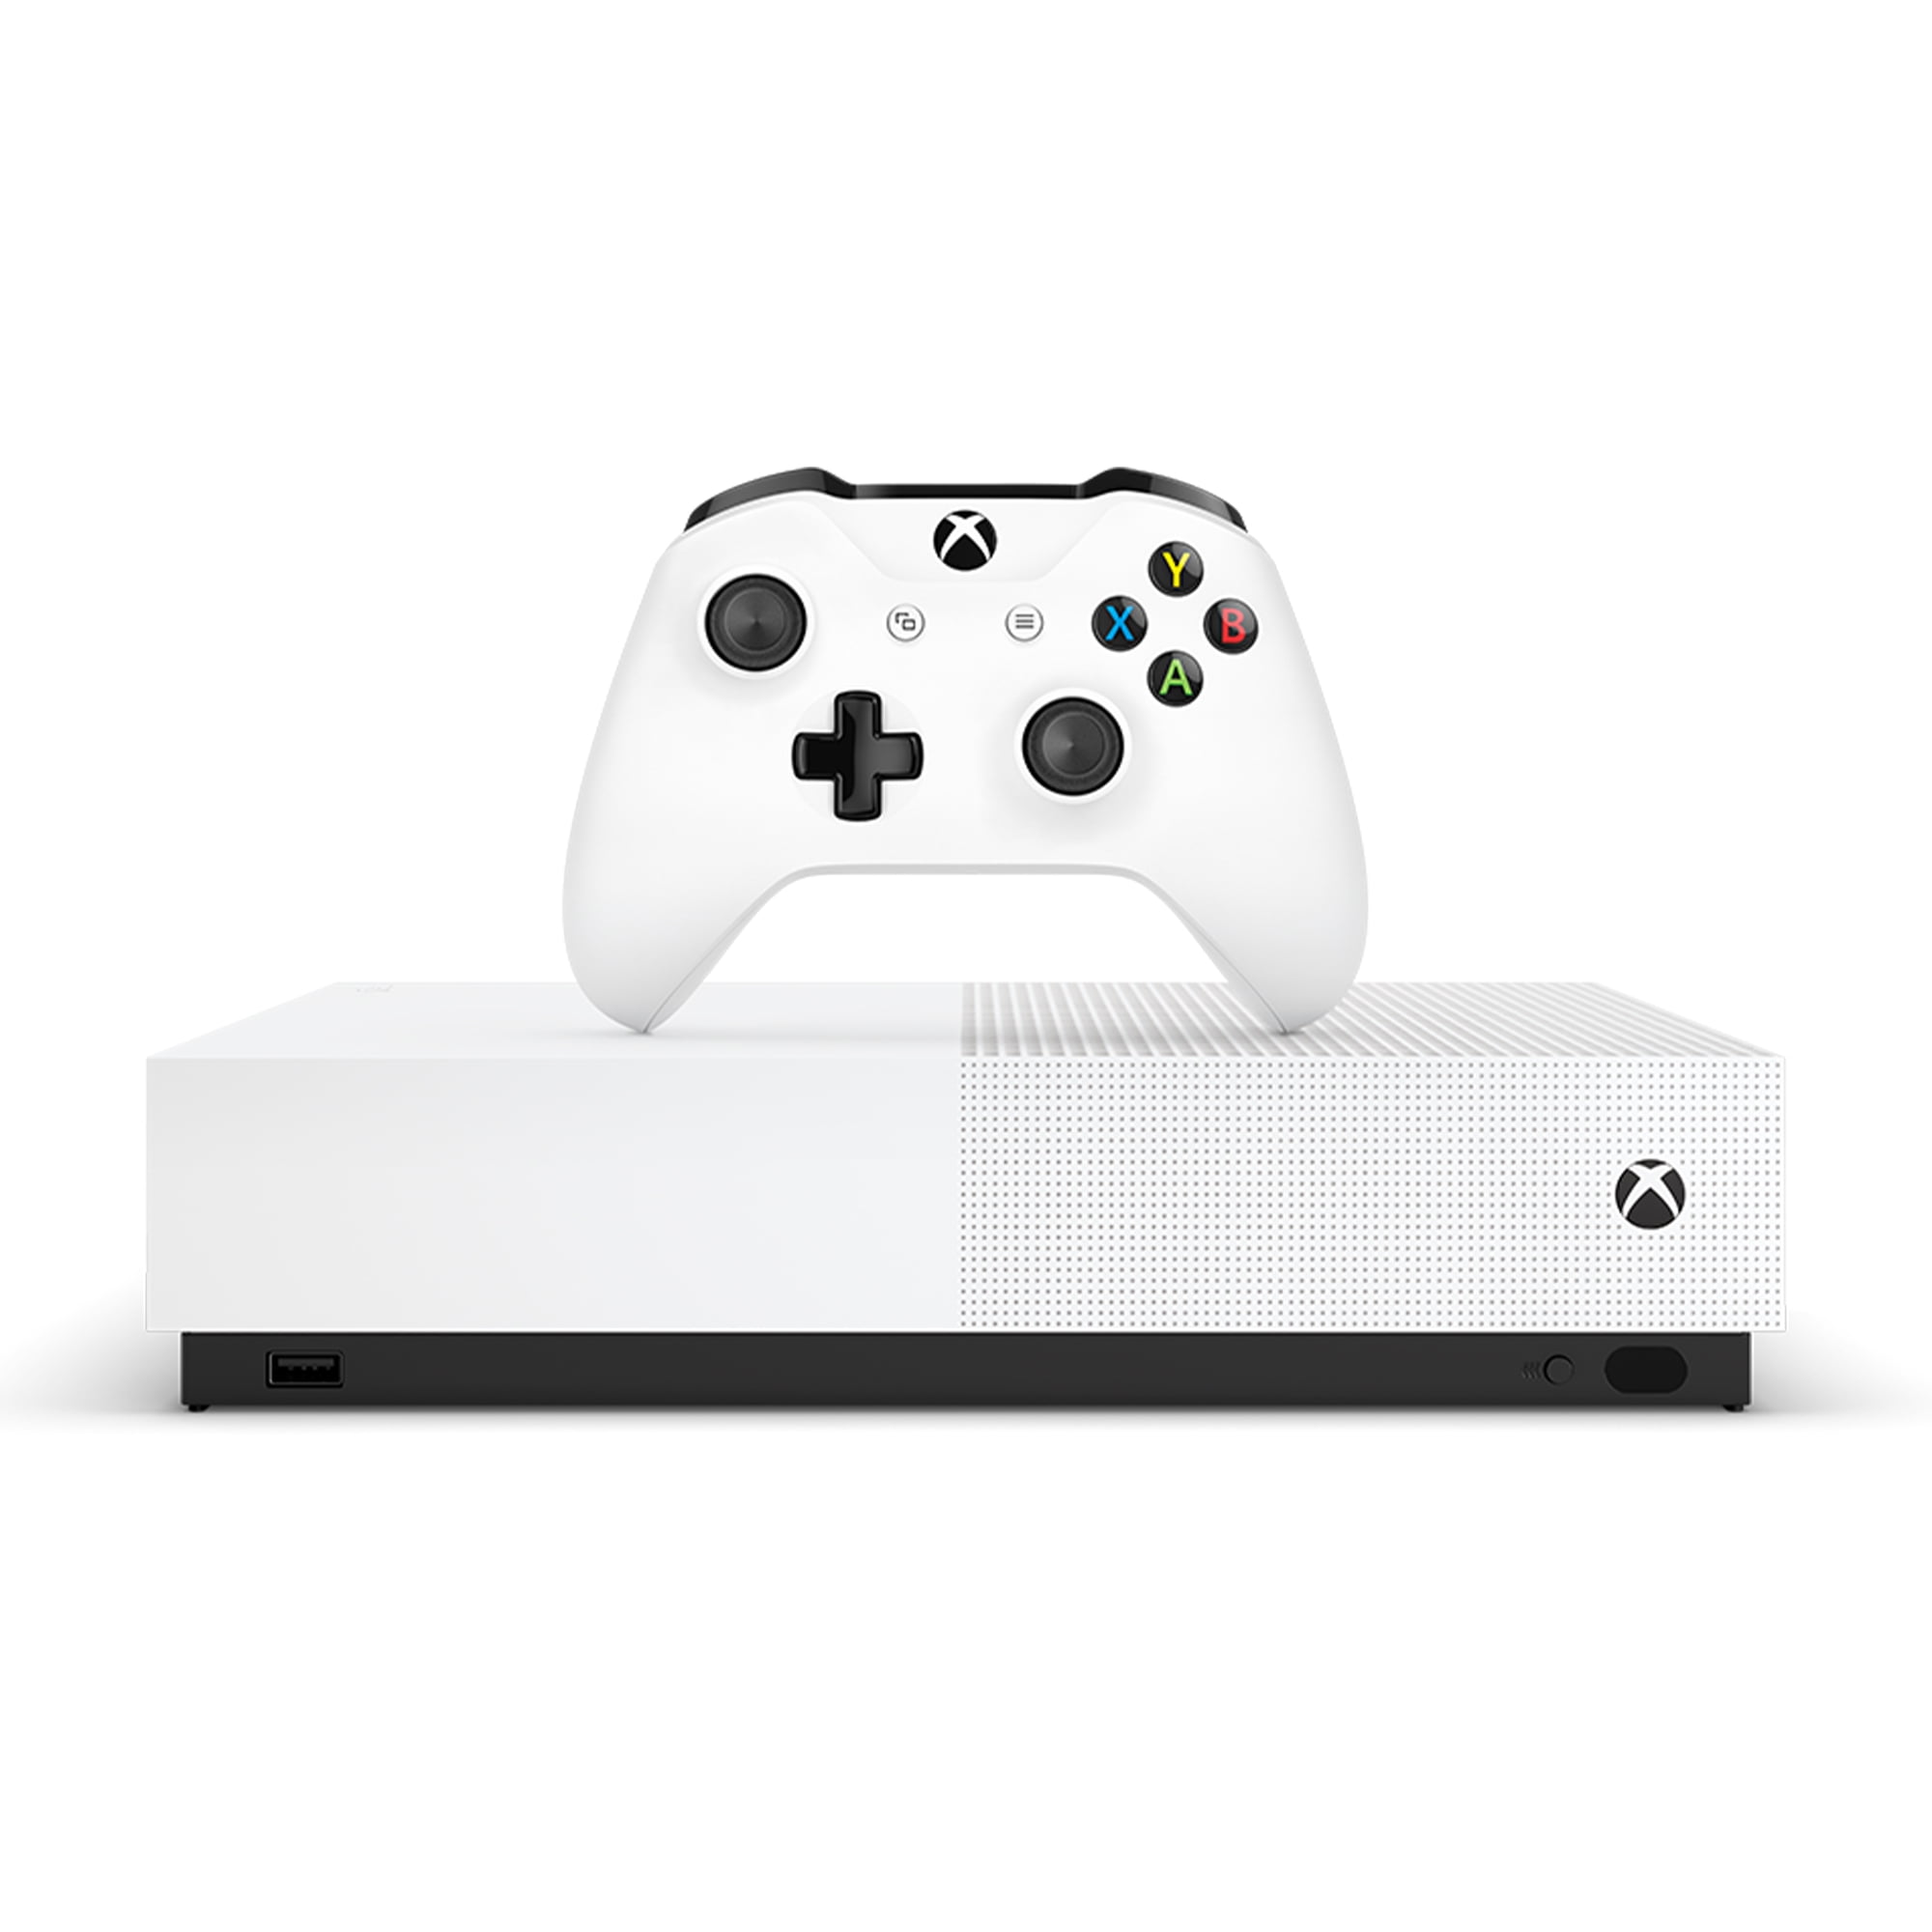  Xbox One S 500GB Console - Forza Horizon 3 Bundle  [Discontinued] : Video Games